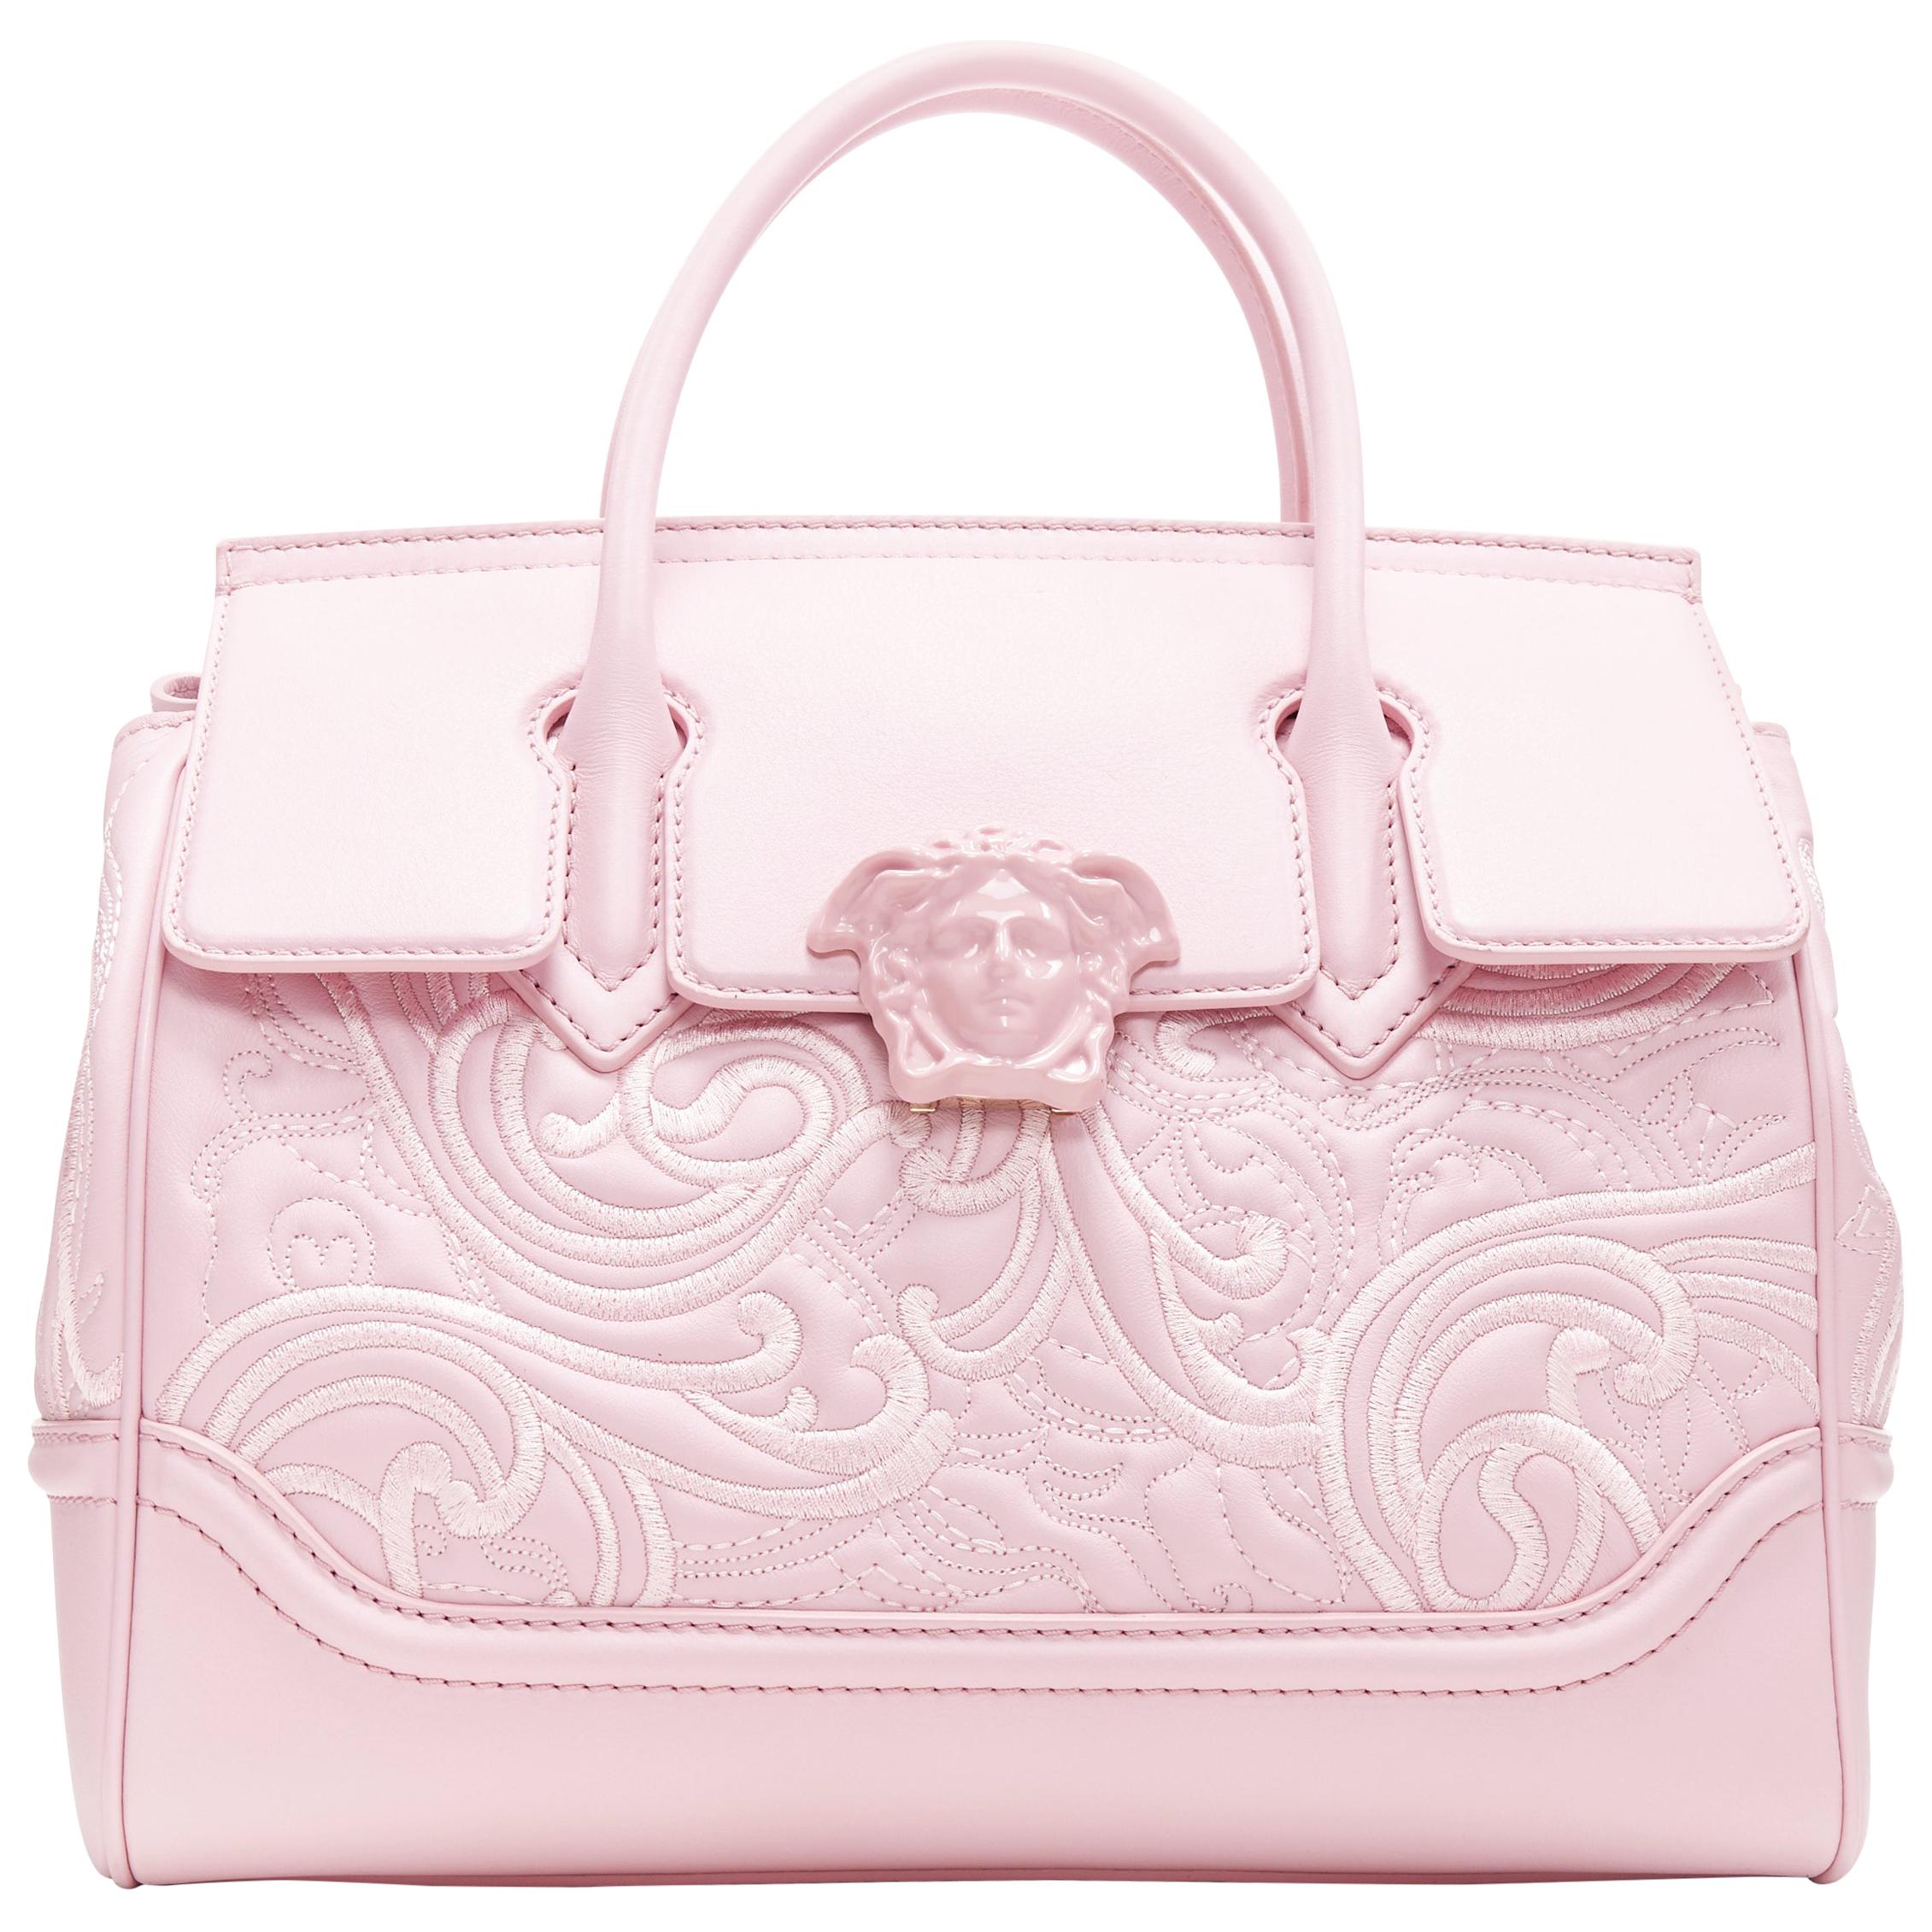 new VERSACE Palazzo Empire pink leather embroidery Medusa flap shoulder bag